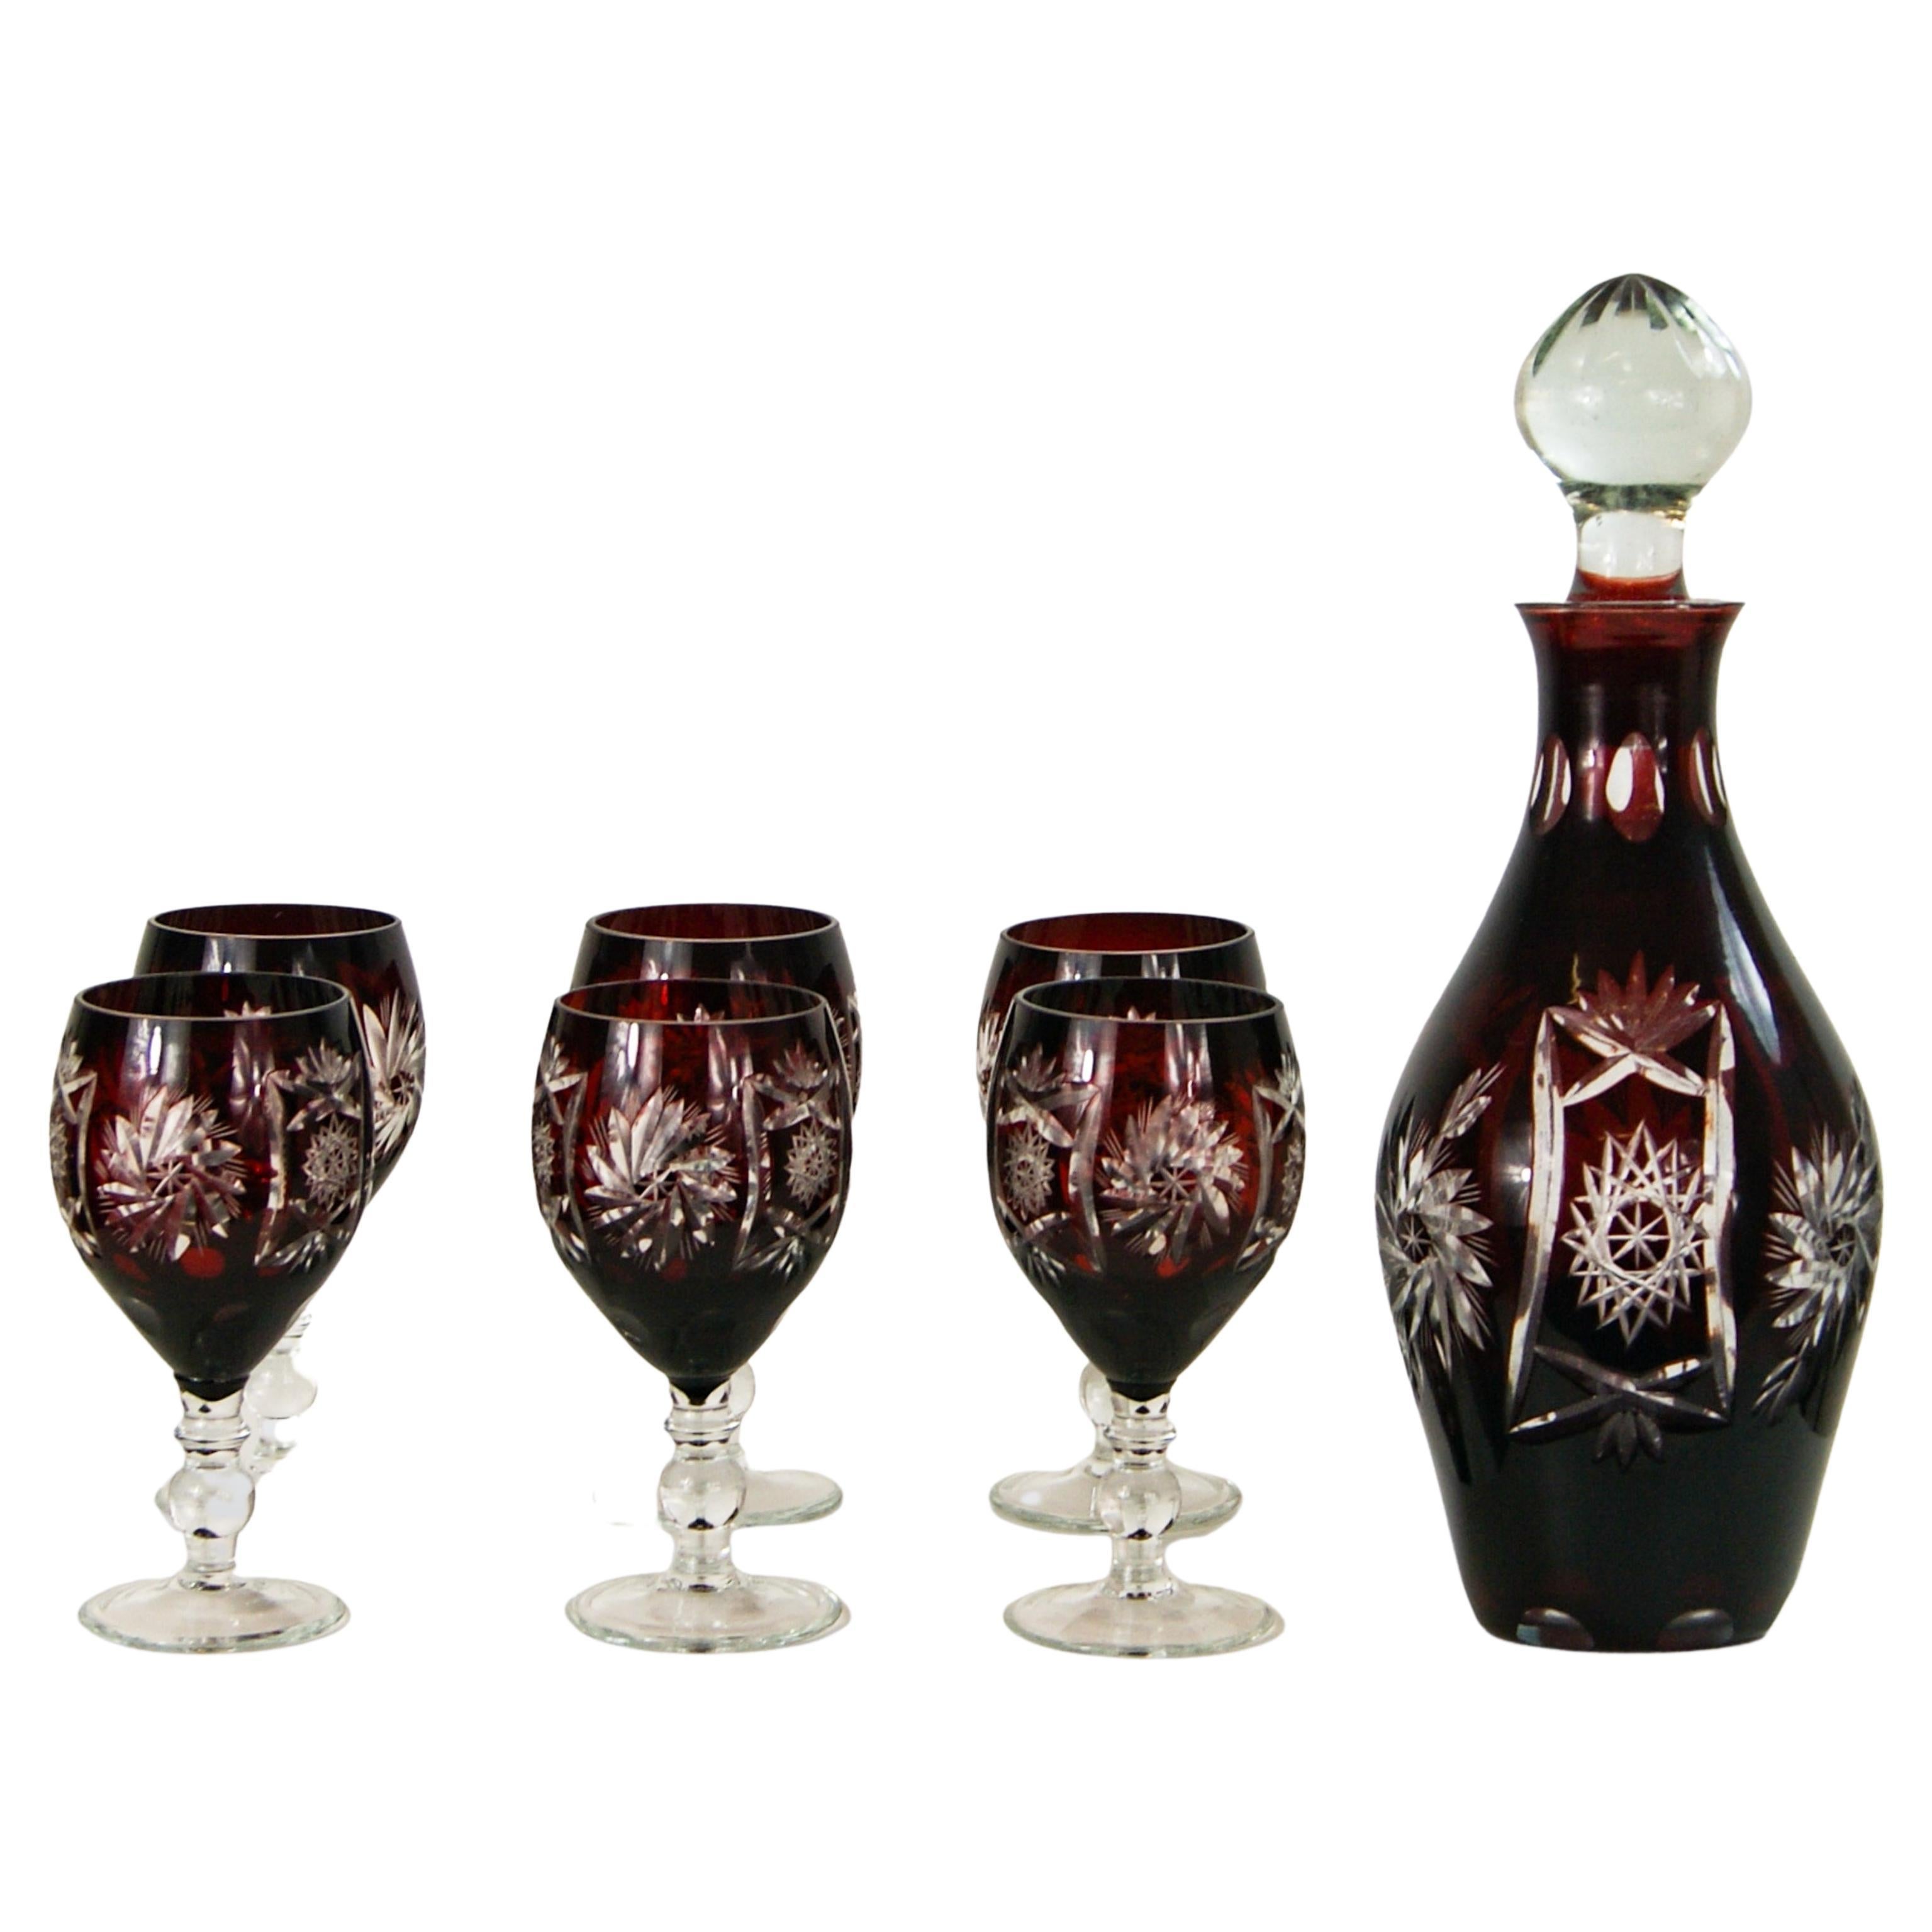 Bohemian / Czech cut glass decanter and wine glasses set.
Matching 8 piece set of ruby red cut to clear glass.
The stopper is in clear glass and bears the same cut glass design.

In very good vintage condition.
With some light surface scratches